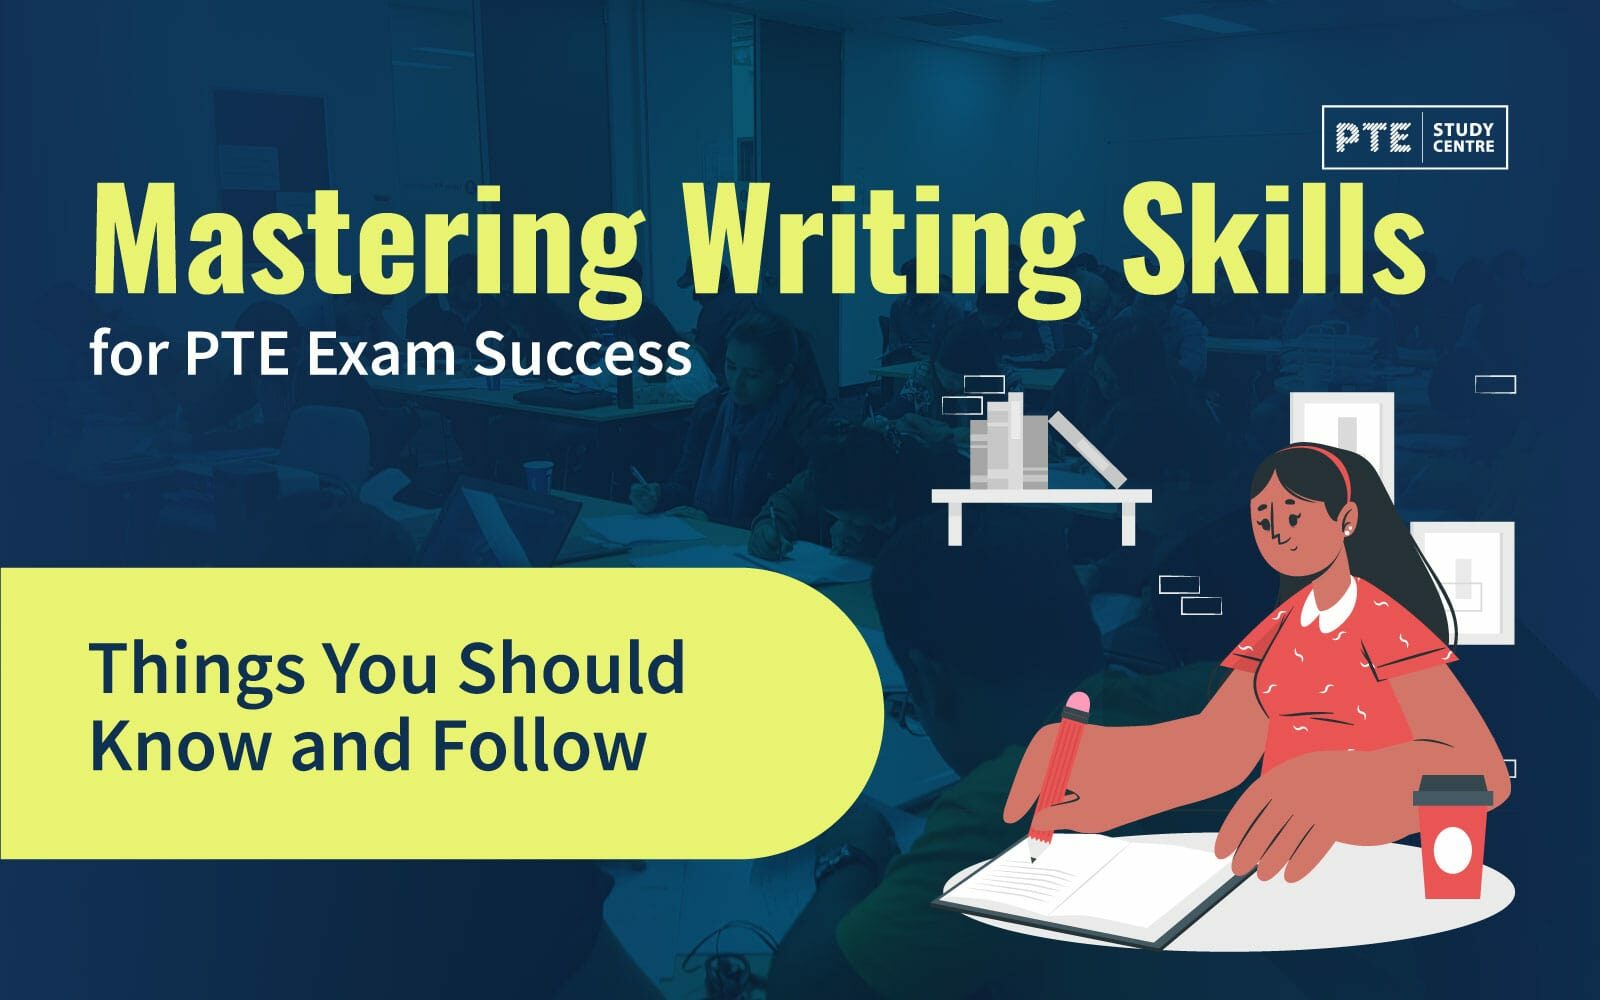 Mastering Writing Skills for PTE Exam Success